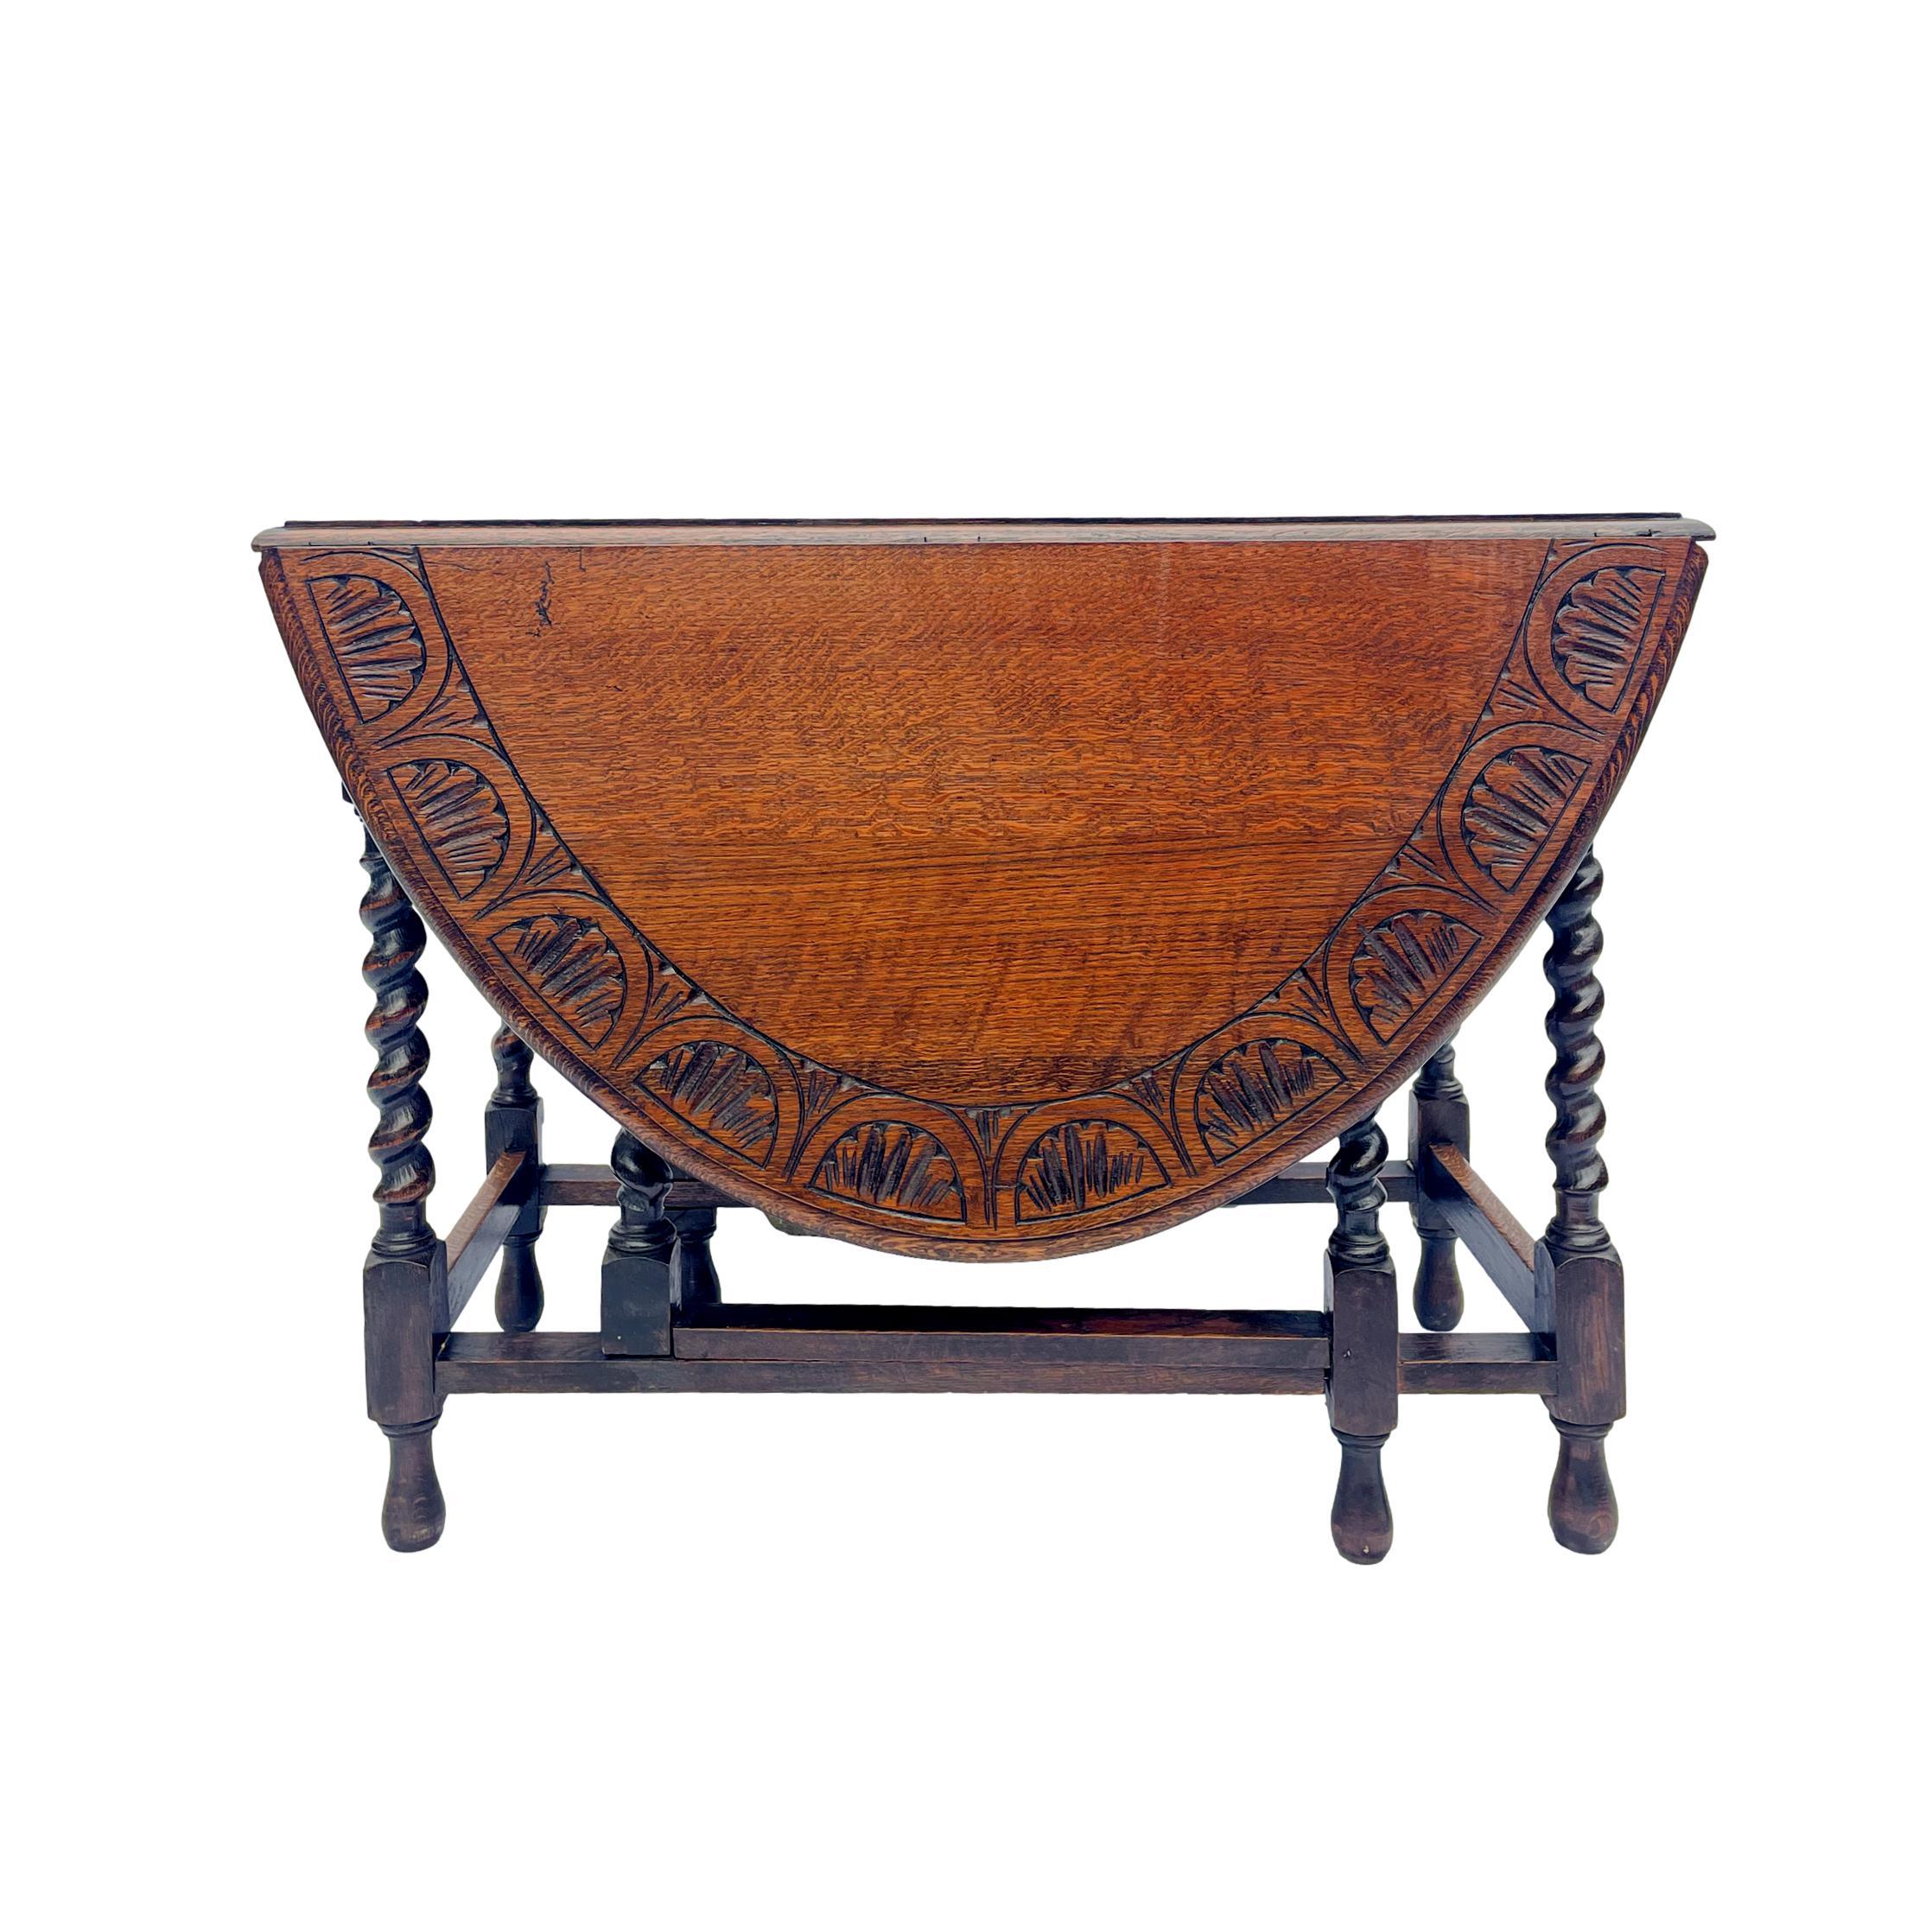 Oak Barley Twist Drop-Leaf Table with a Carved Top, English, circa 1920 In Good Condition For Sale In Banner Elk, NC